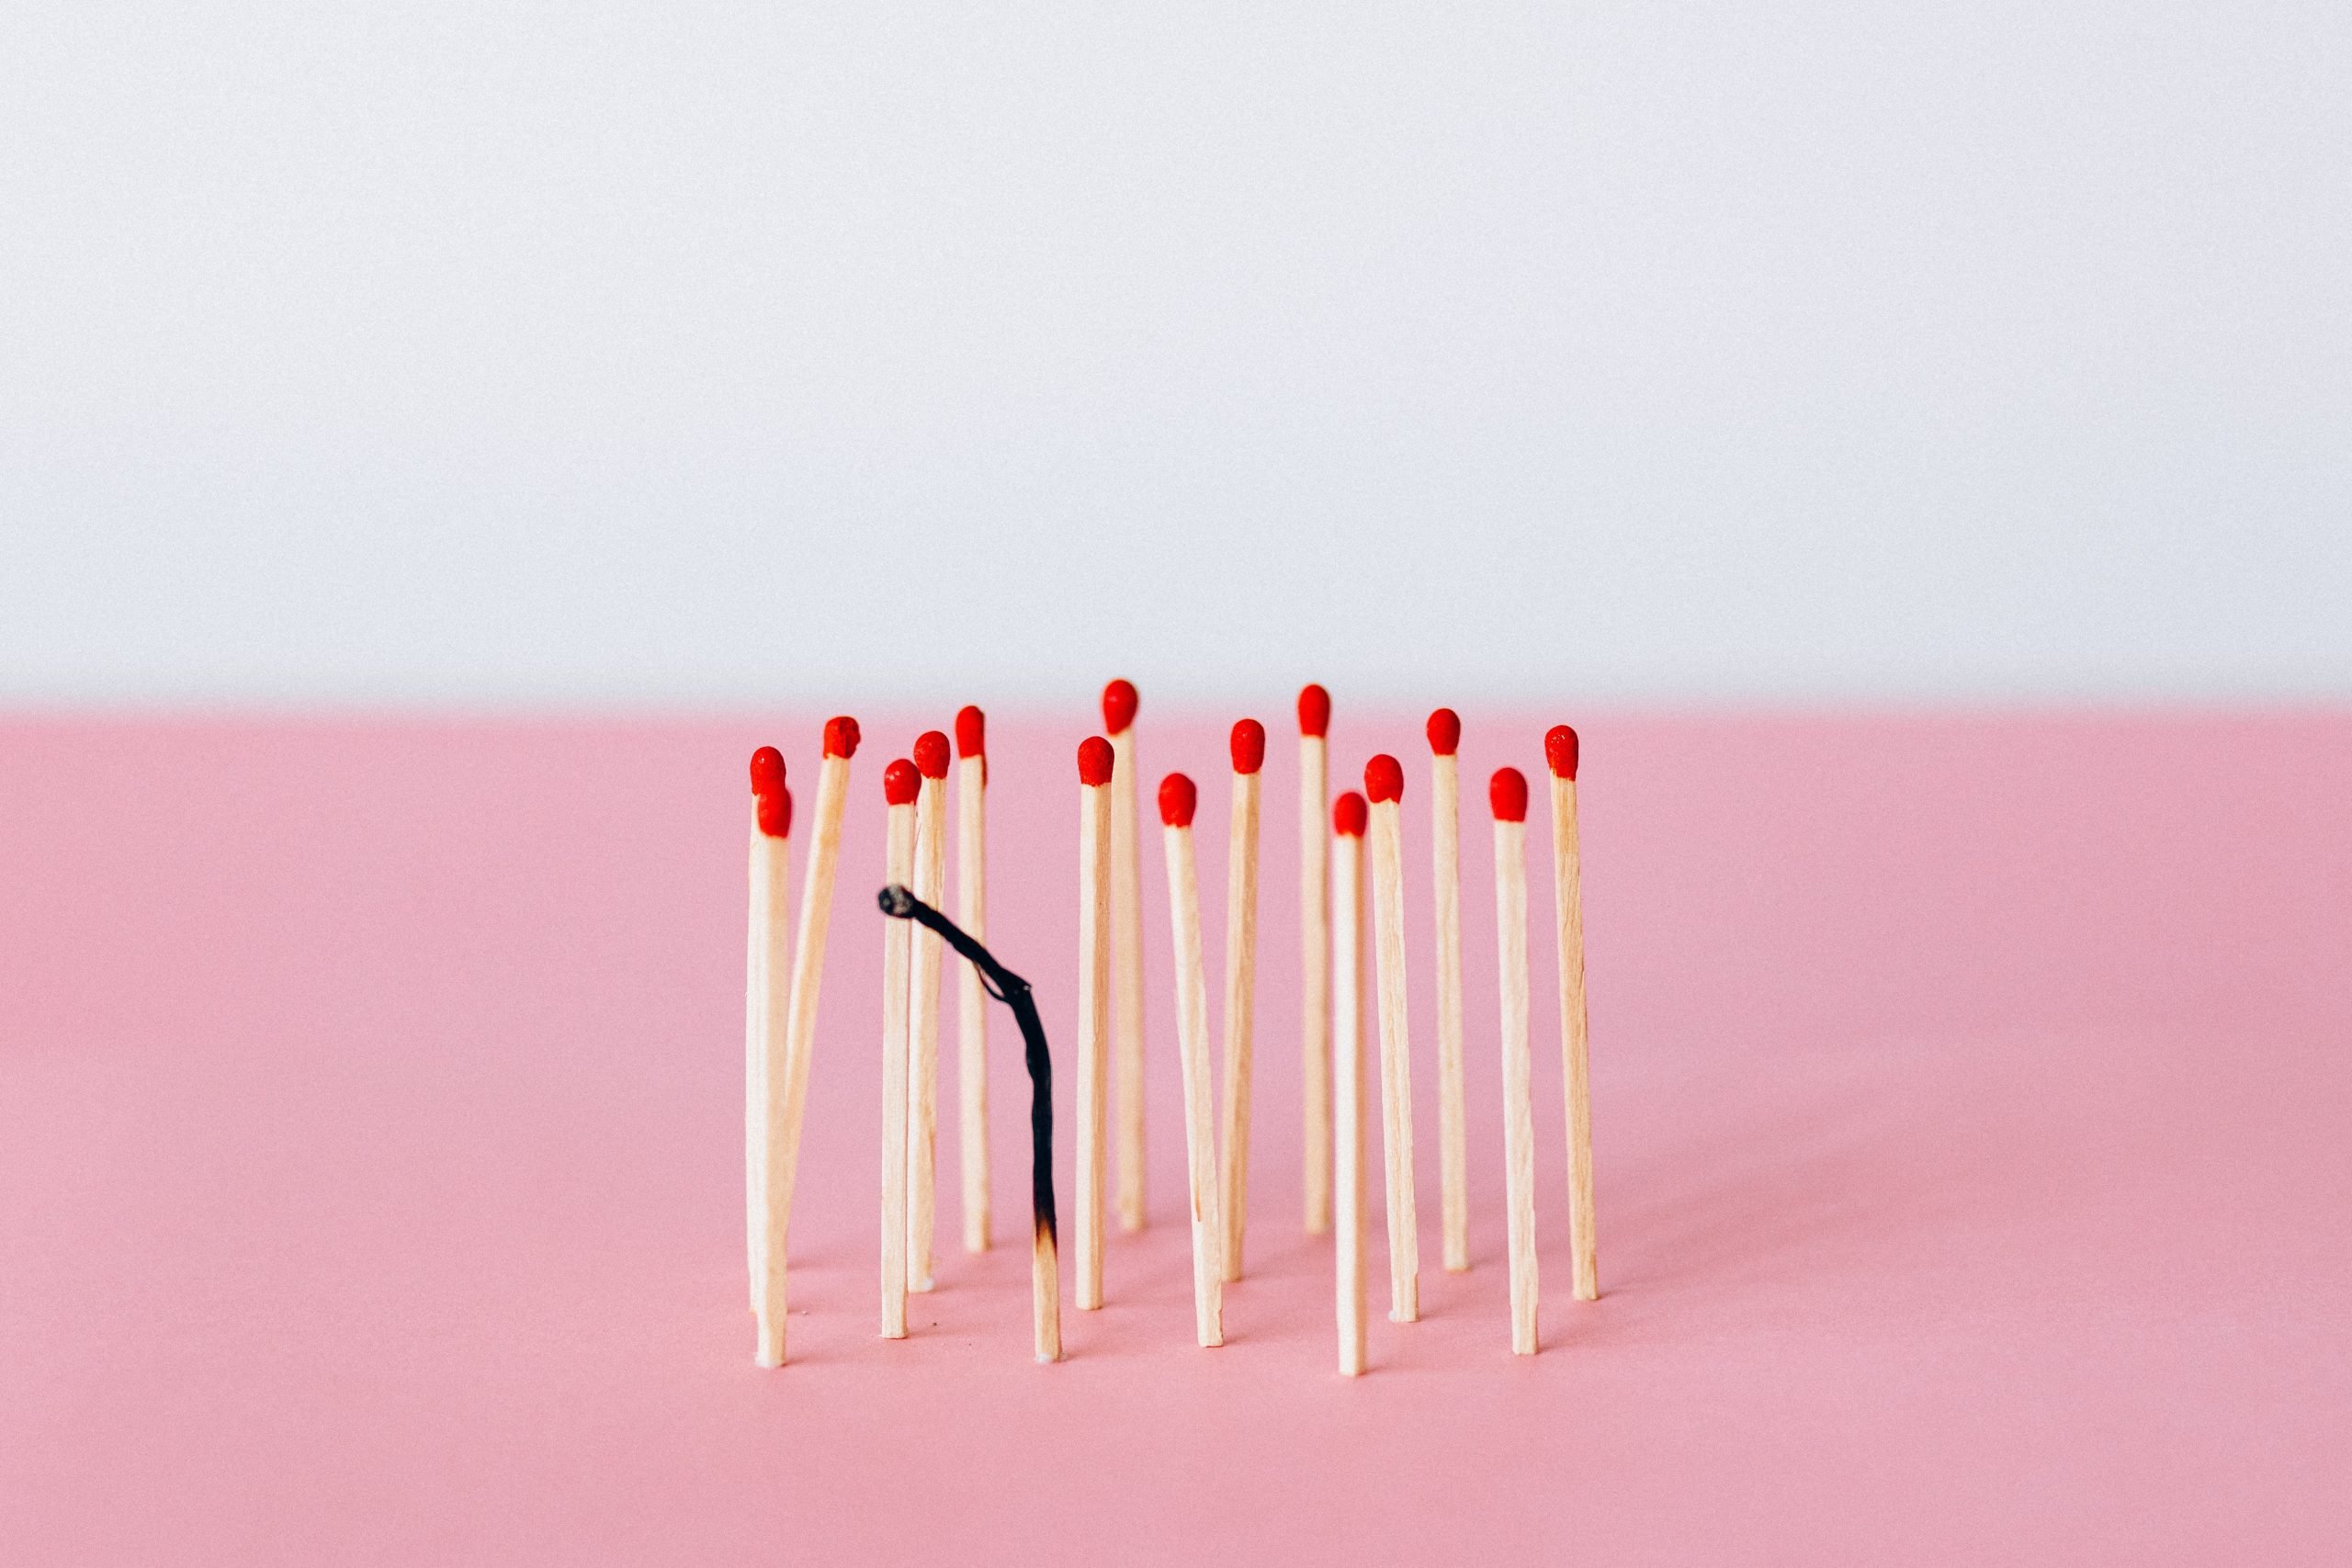 A pink background with matchsticks standing upright and one matchstick in the front is burnt black.